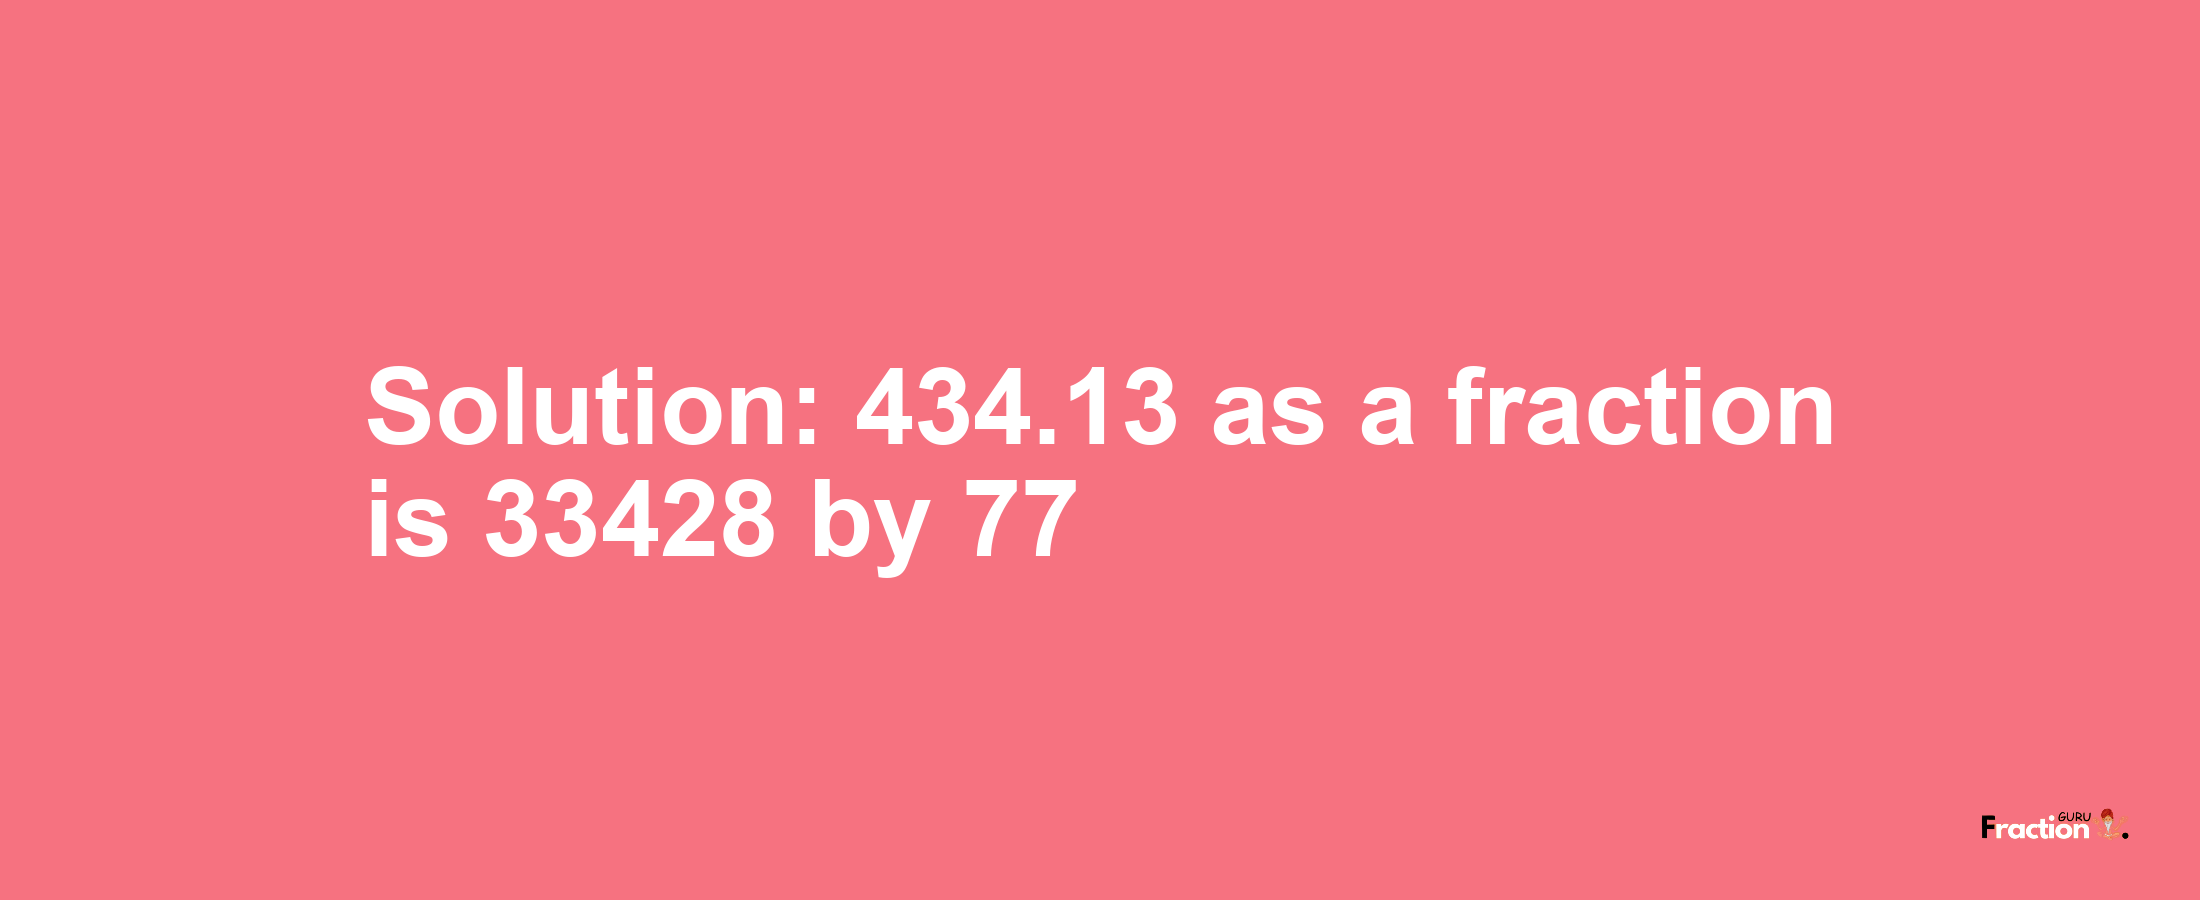 Solution:434.13 as a fraction is 33428/77